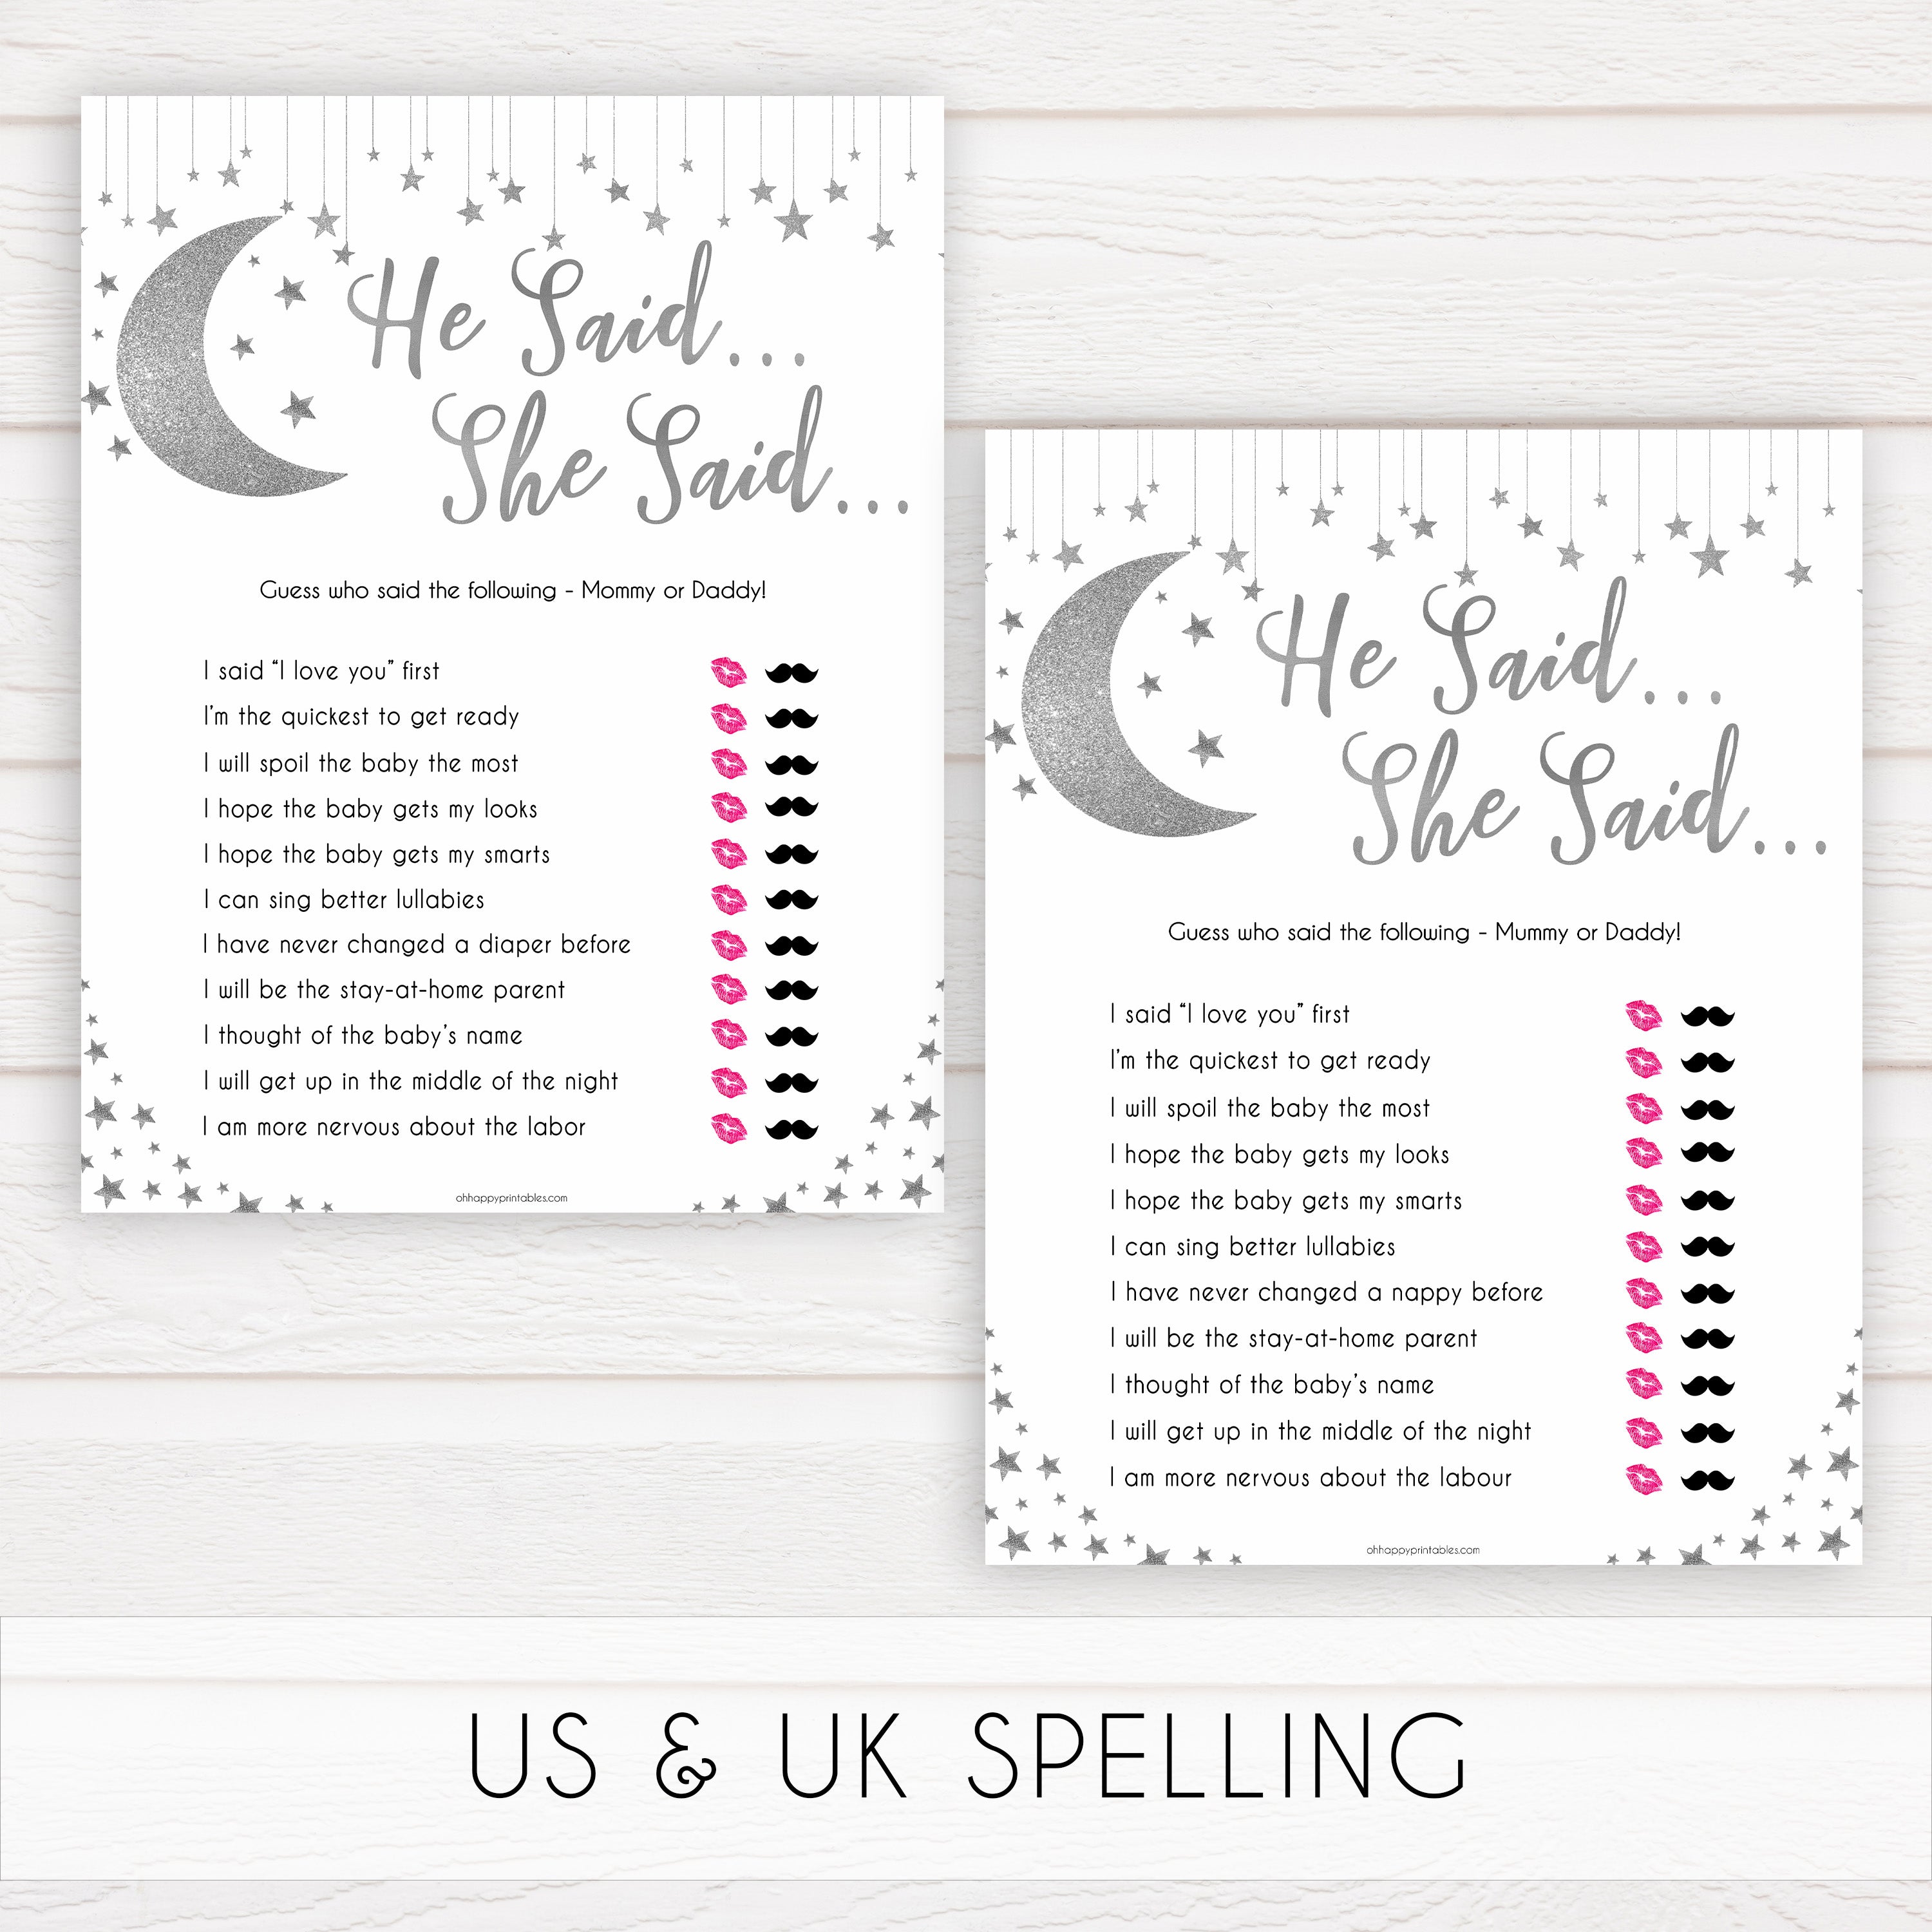 Silver little star, he said she said baby games, baby shower games, printable baby games, fun baby games, twinkle little star games, baby games, fun baby shower ideas, baby shower ideas